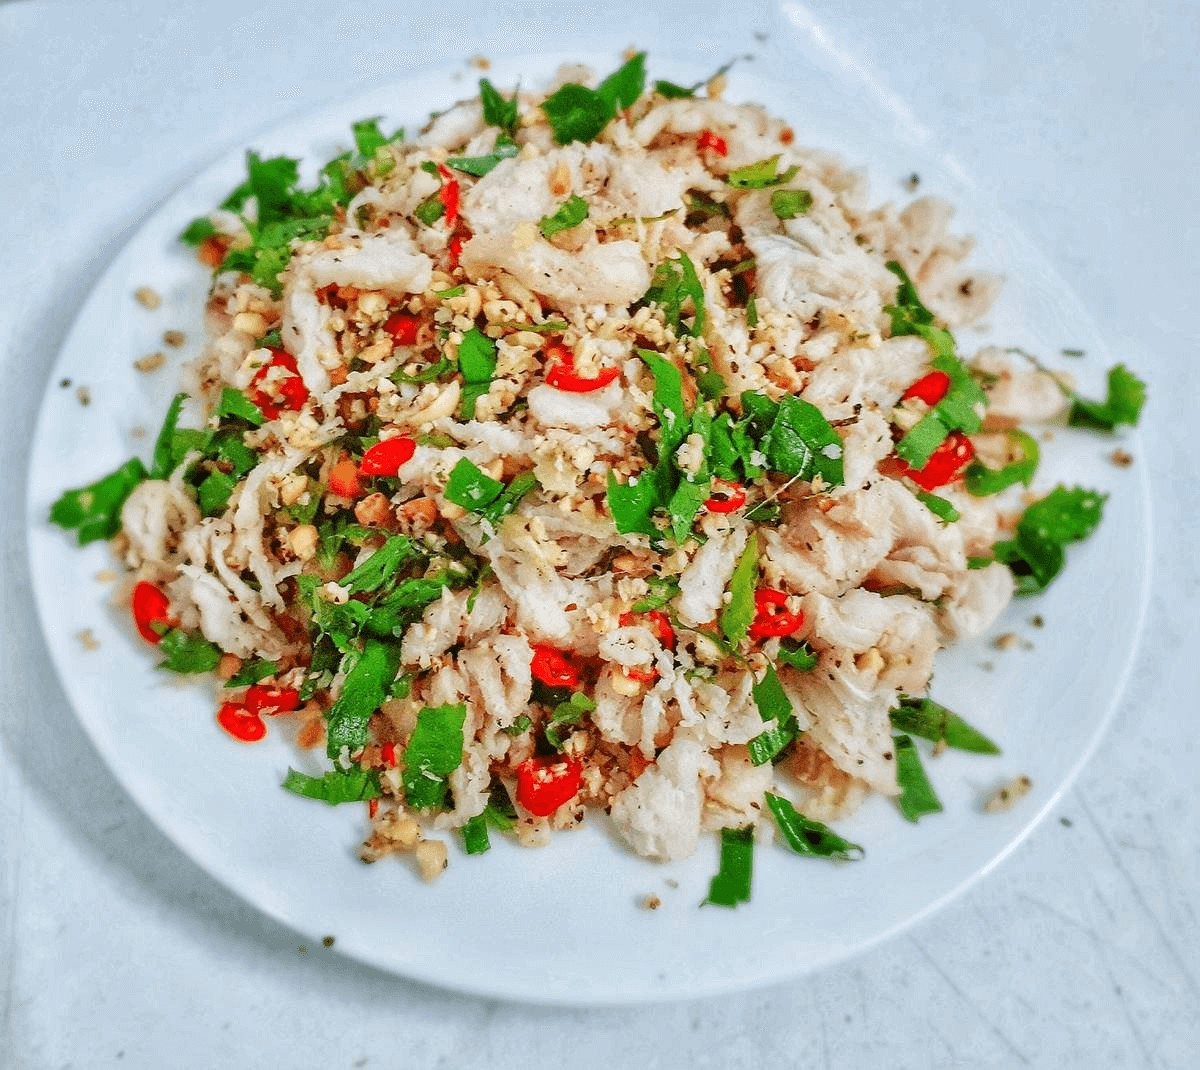 Quang Binh Travel Guide Must-try Local Food - Ngheo Fish Salad (Gỏi Cá Nghéo)